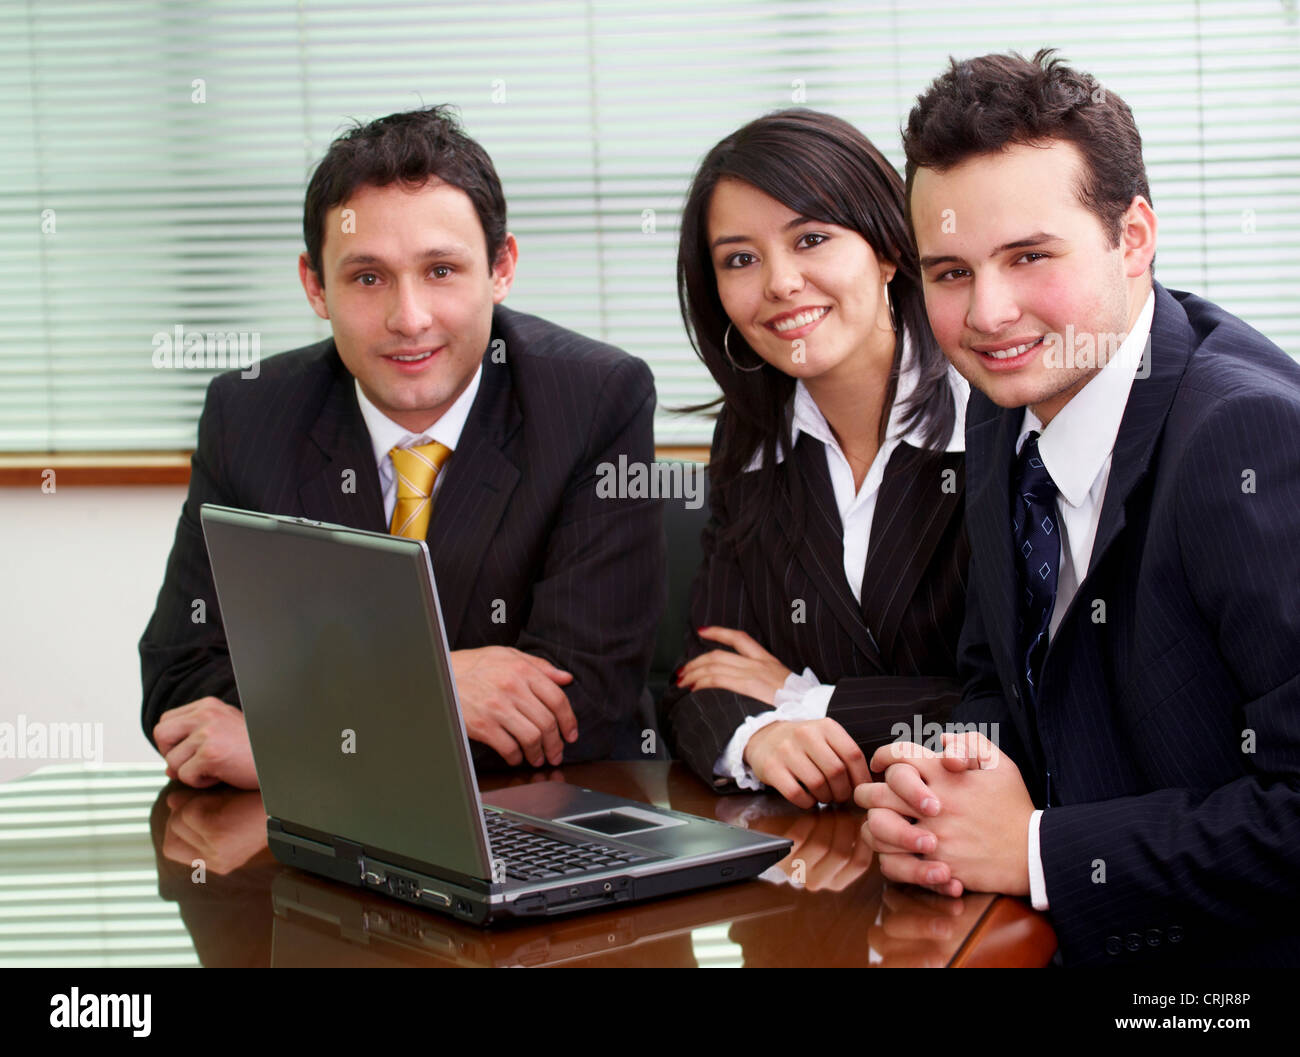 businessmen and businesswomen in a business meeting in an office smiling with a laptop on the table Stock Photo